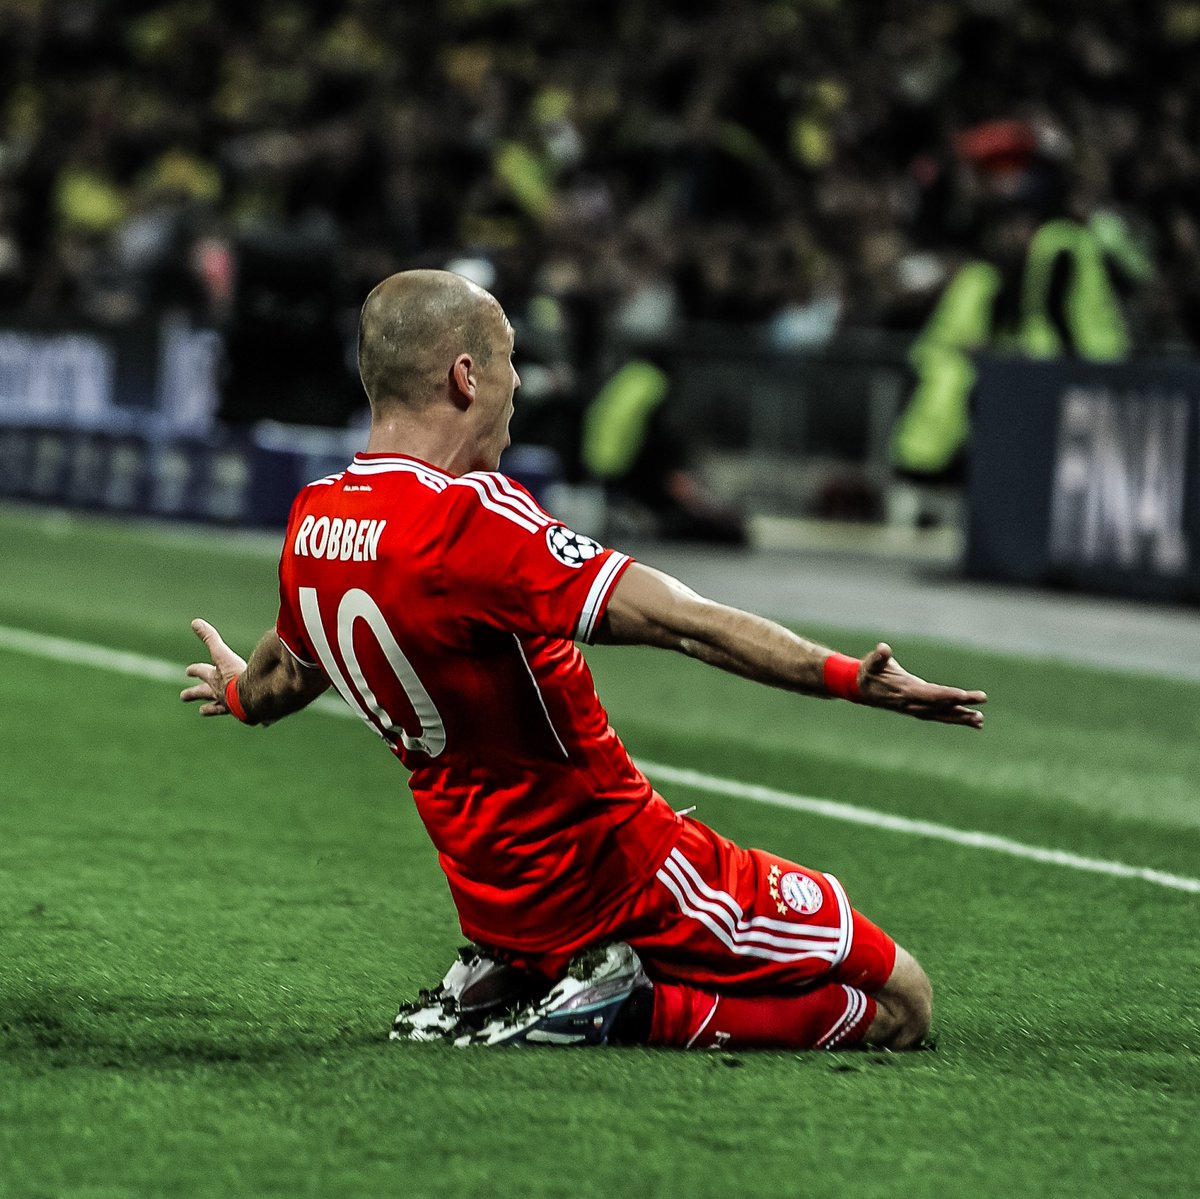 Uefa Champions League Arjen Robben 13 Ucl Final Scores The Winning Goal Bayern Crowned Champions Awarded Man Of The Match Happy Birthday Robben Ucl Fcbayernen Arjenrobben T Co Zam4czfwsp